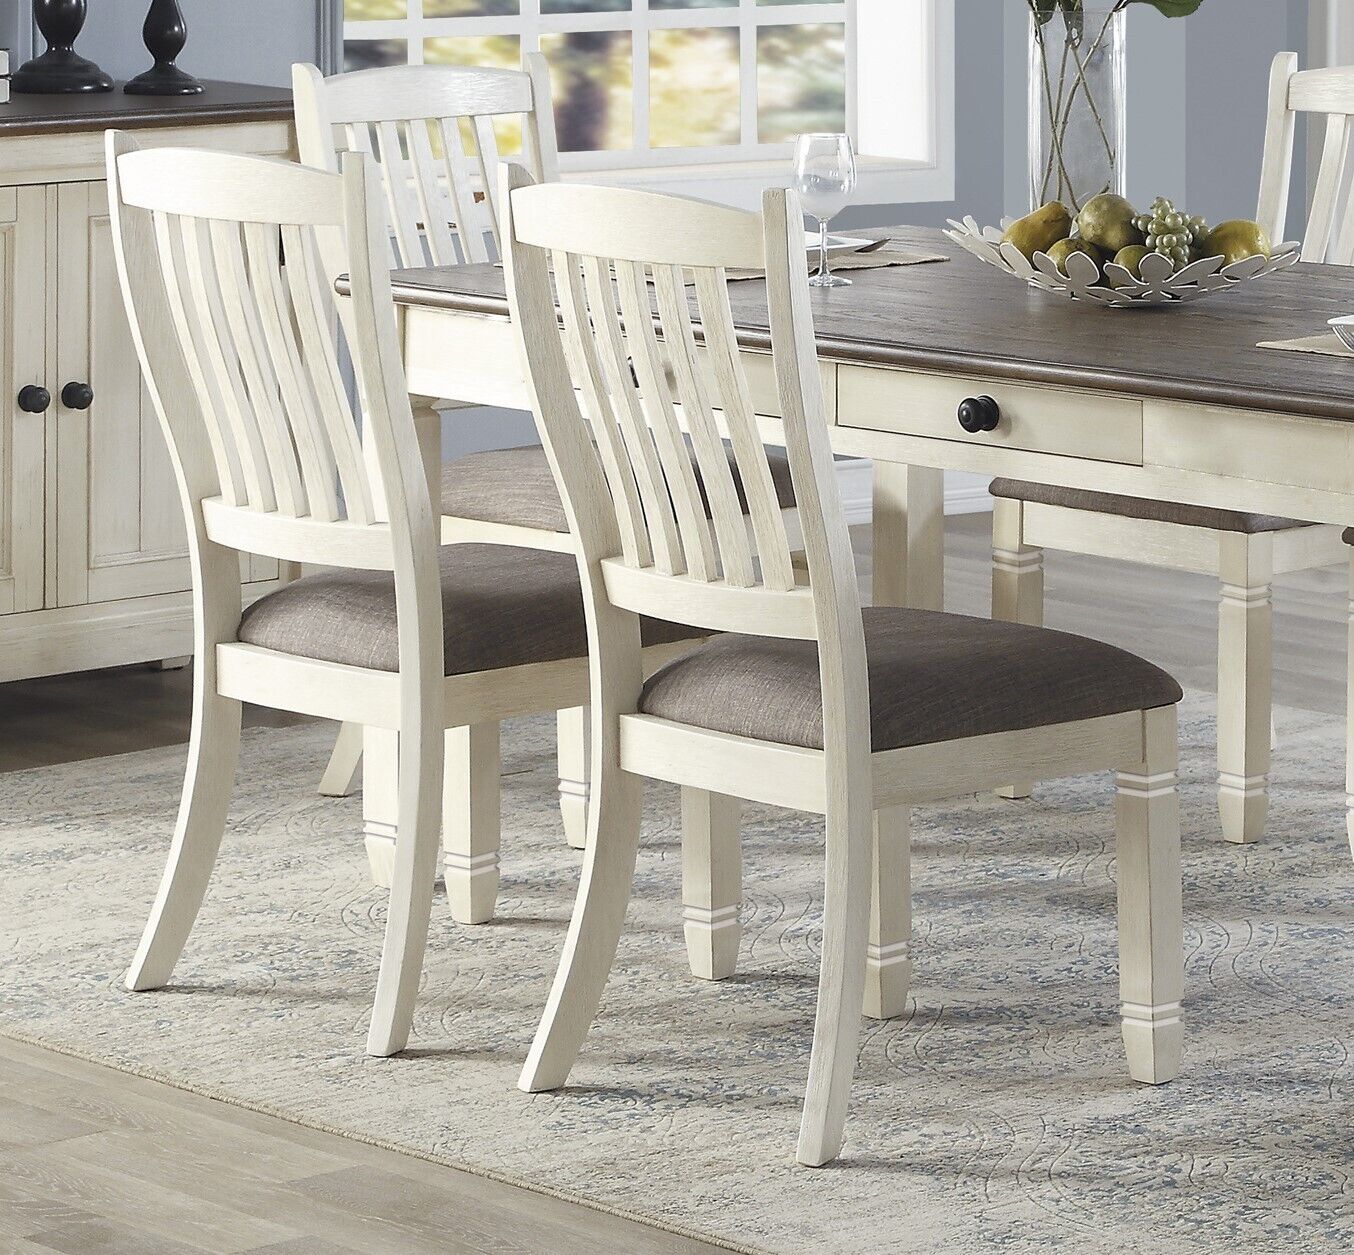 Esofastore Casual Design Antique White Finish Dining Chair 6pc Set Fabric Upholstered Seat Wooden Furniture